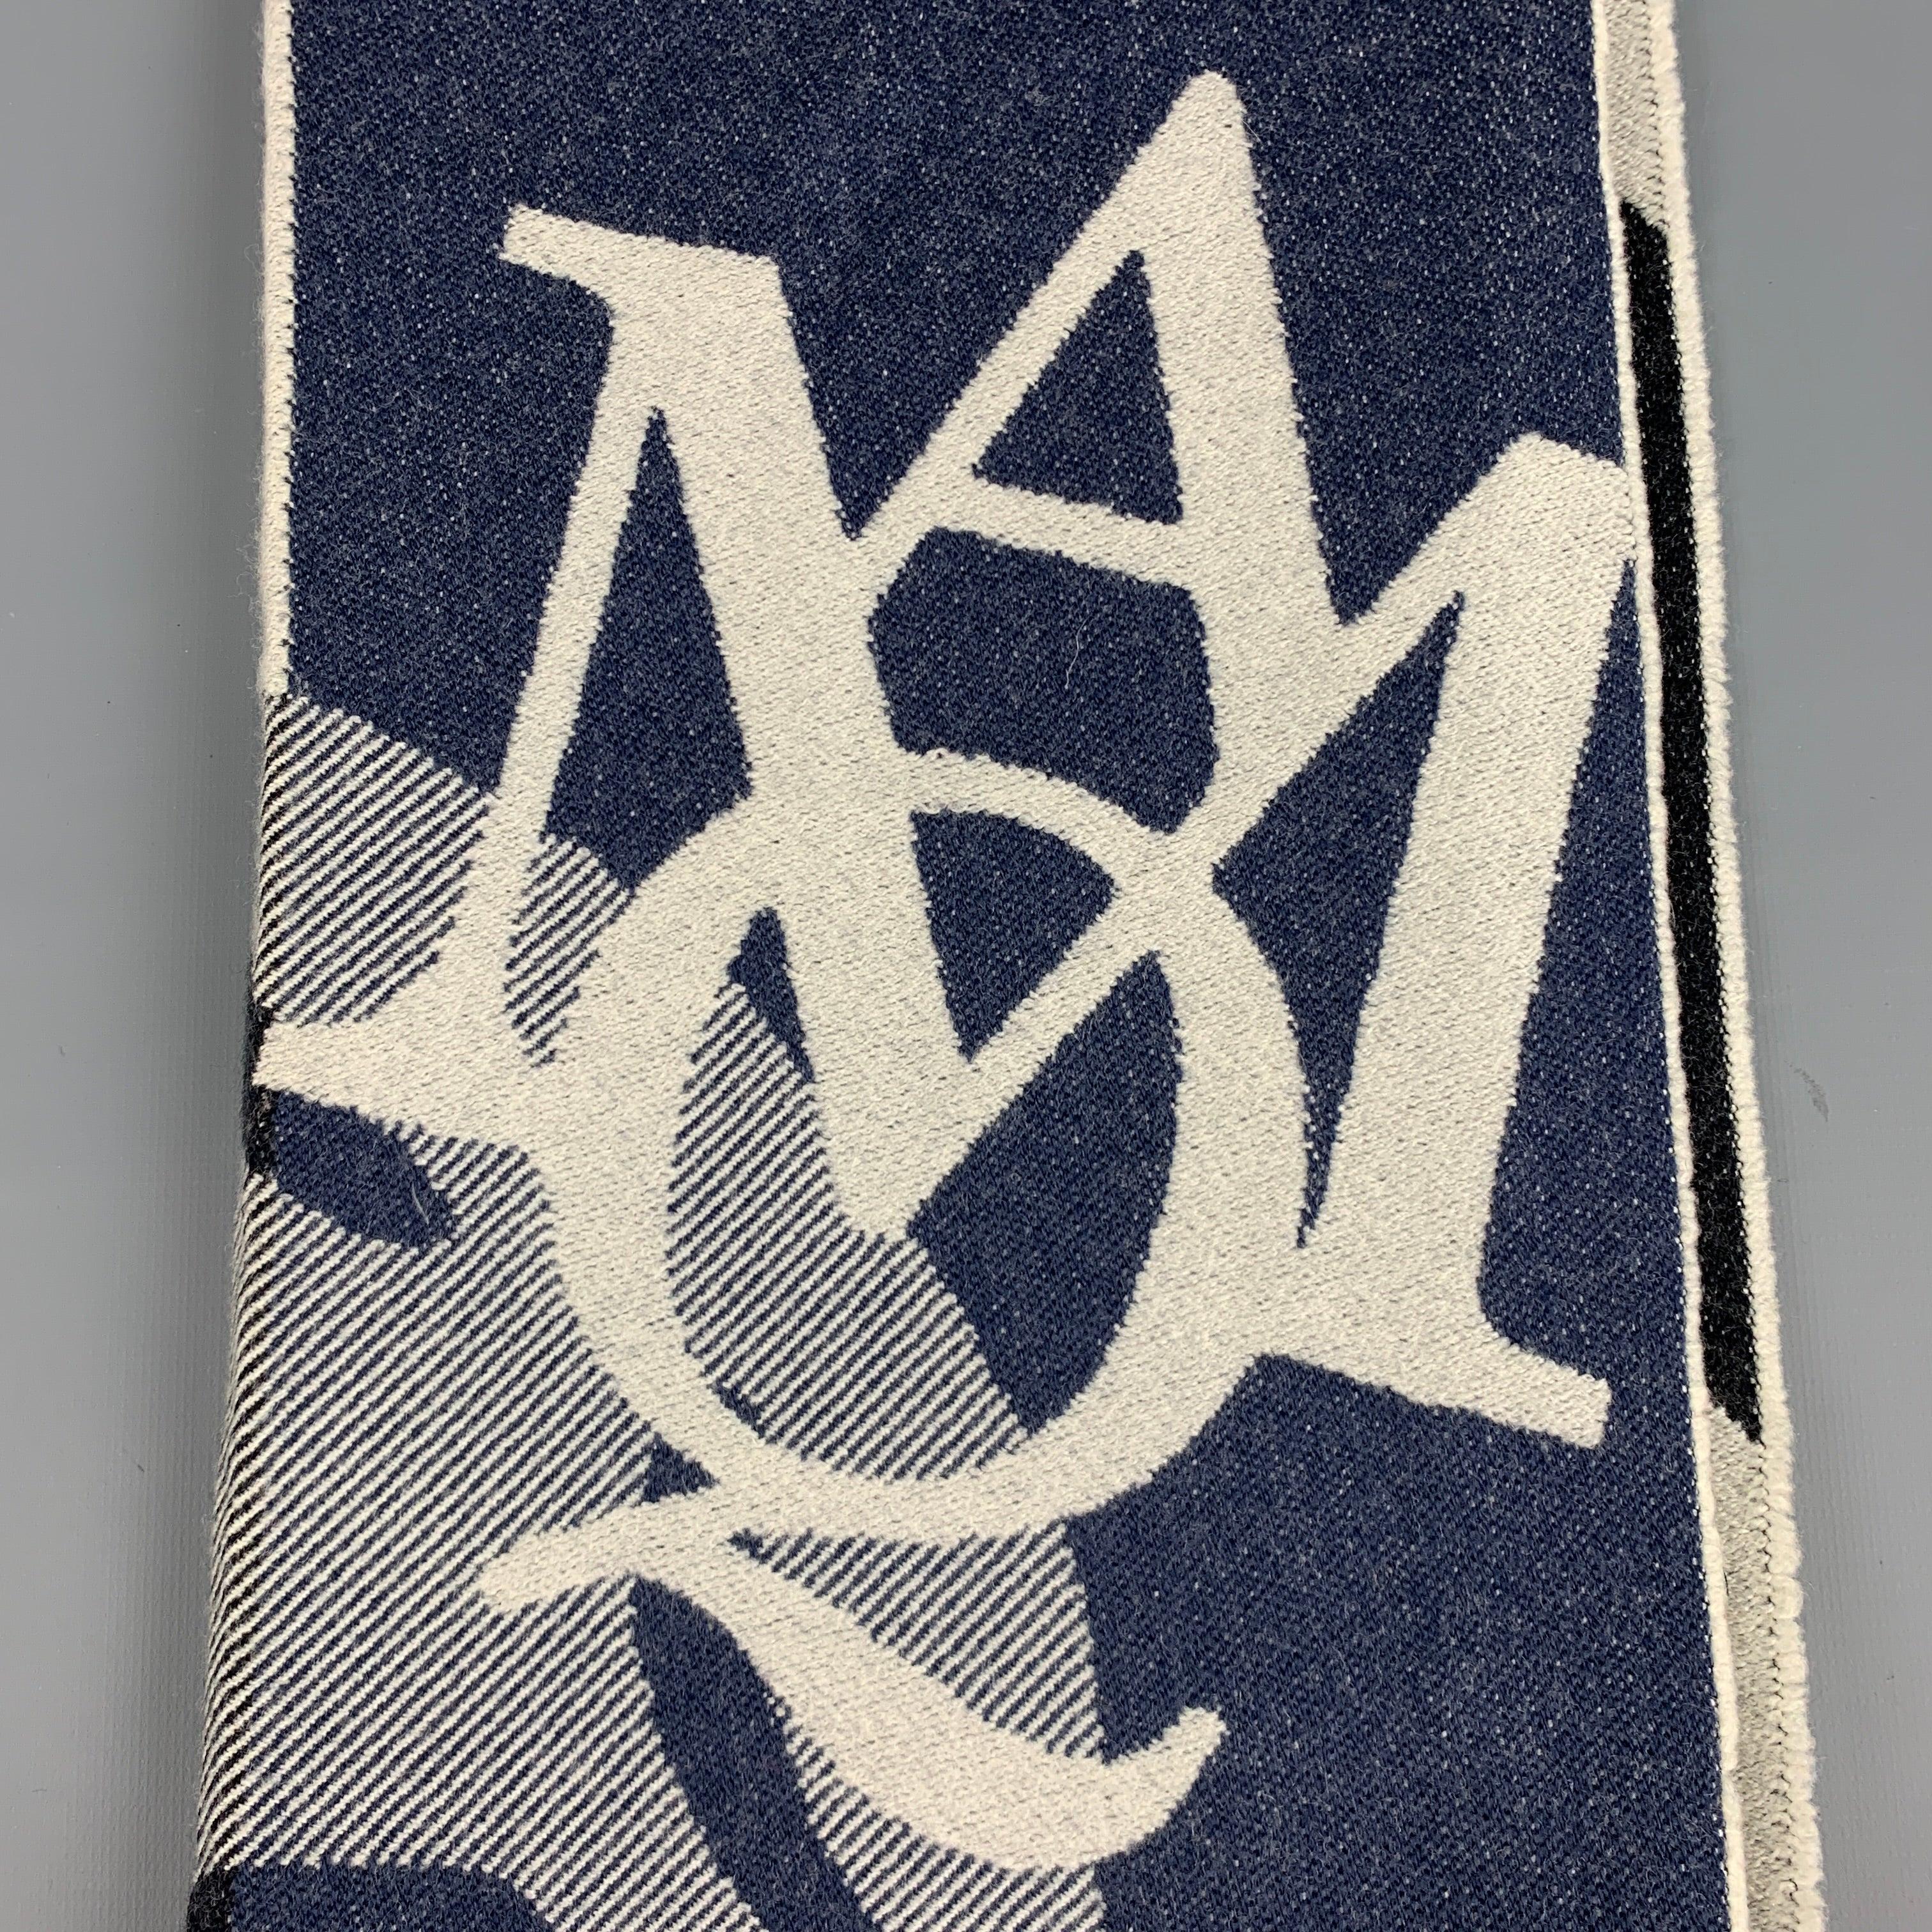 ALEXANDER MCQUEEN scarf
in a blue and grey fabric featuring a reversible style, fringe, and skull and monogram design. Made in Italy.Excellent Pre-Owned Condition. 

Measurements: 
  71 inches  x 18 inches 
  
  
 
Reference No.: 128408
Category: